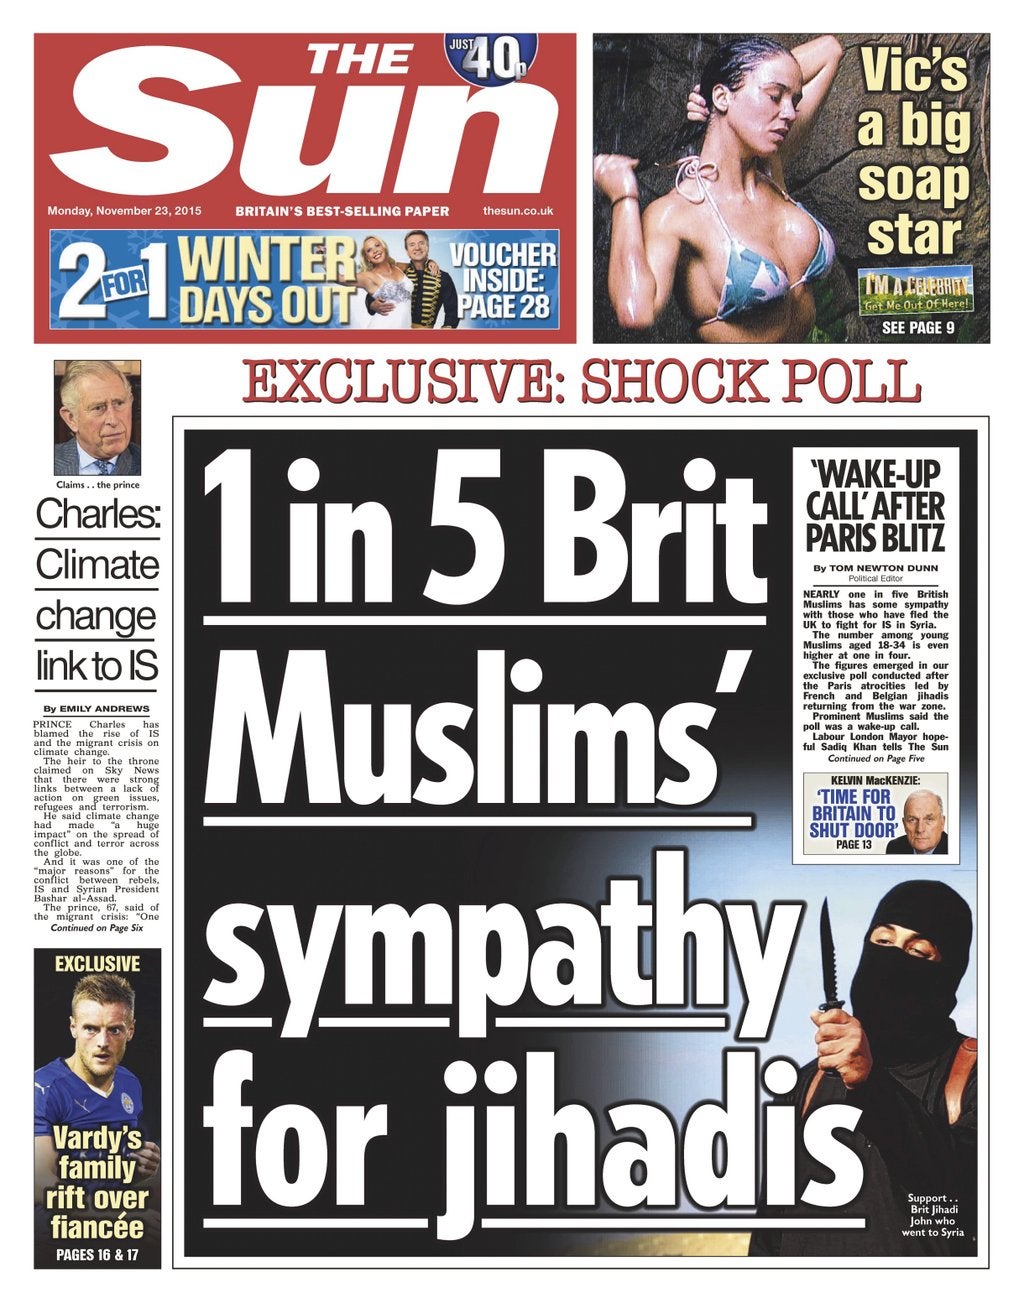 The controversial Sun front page